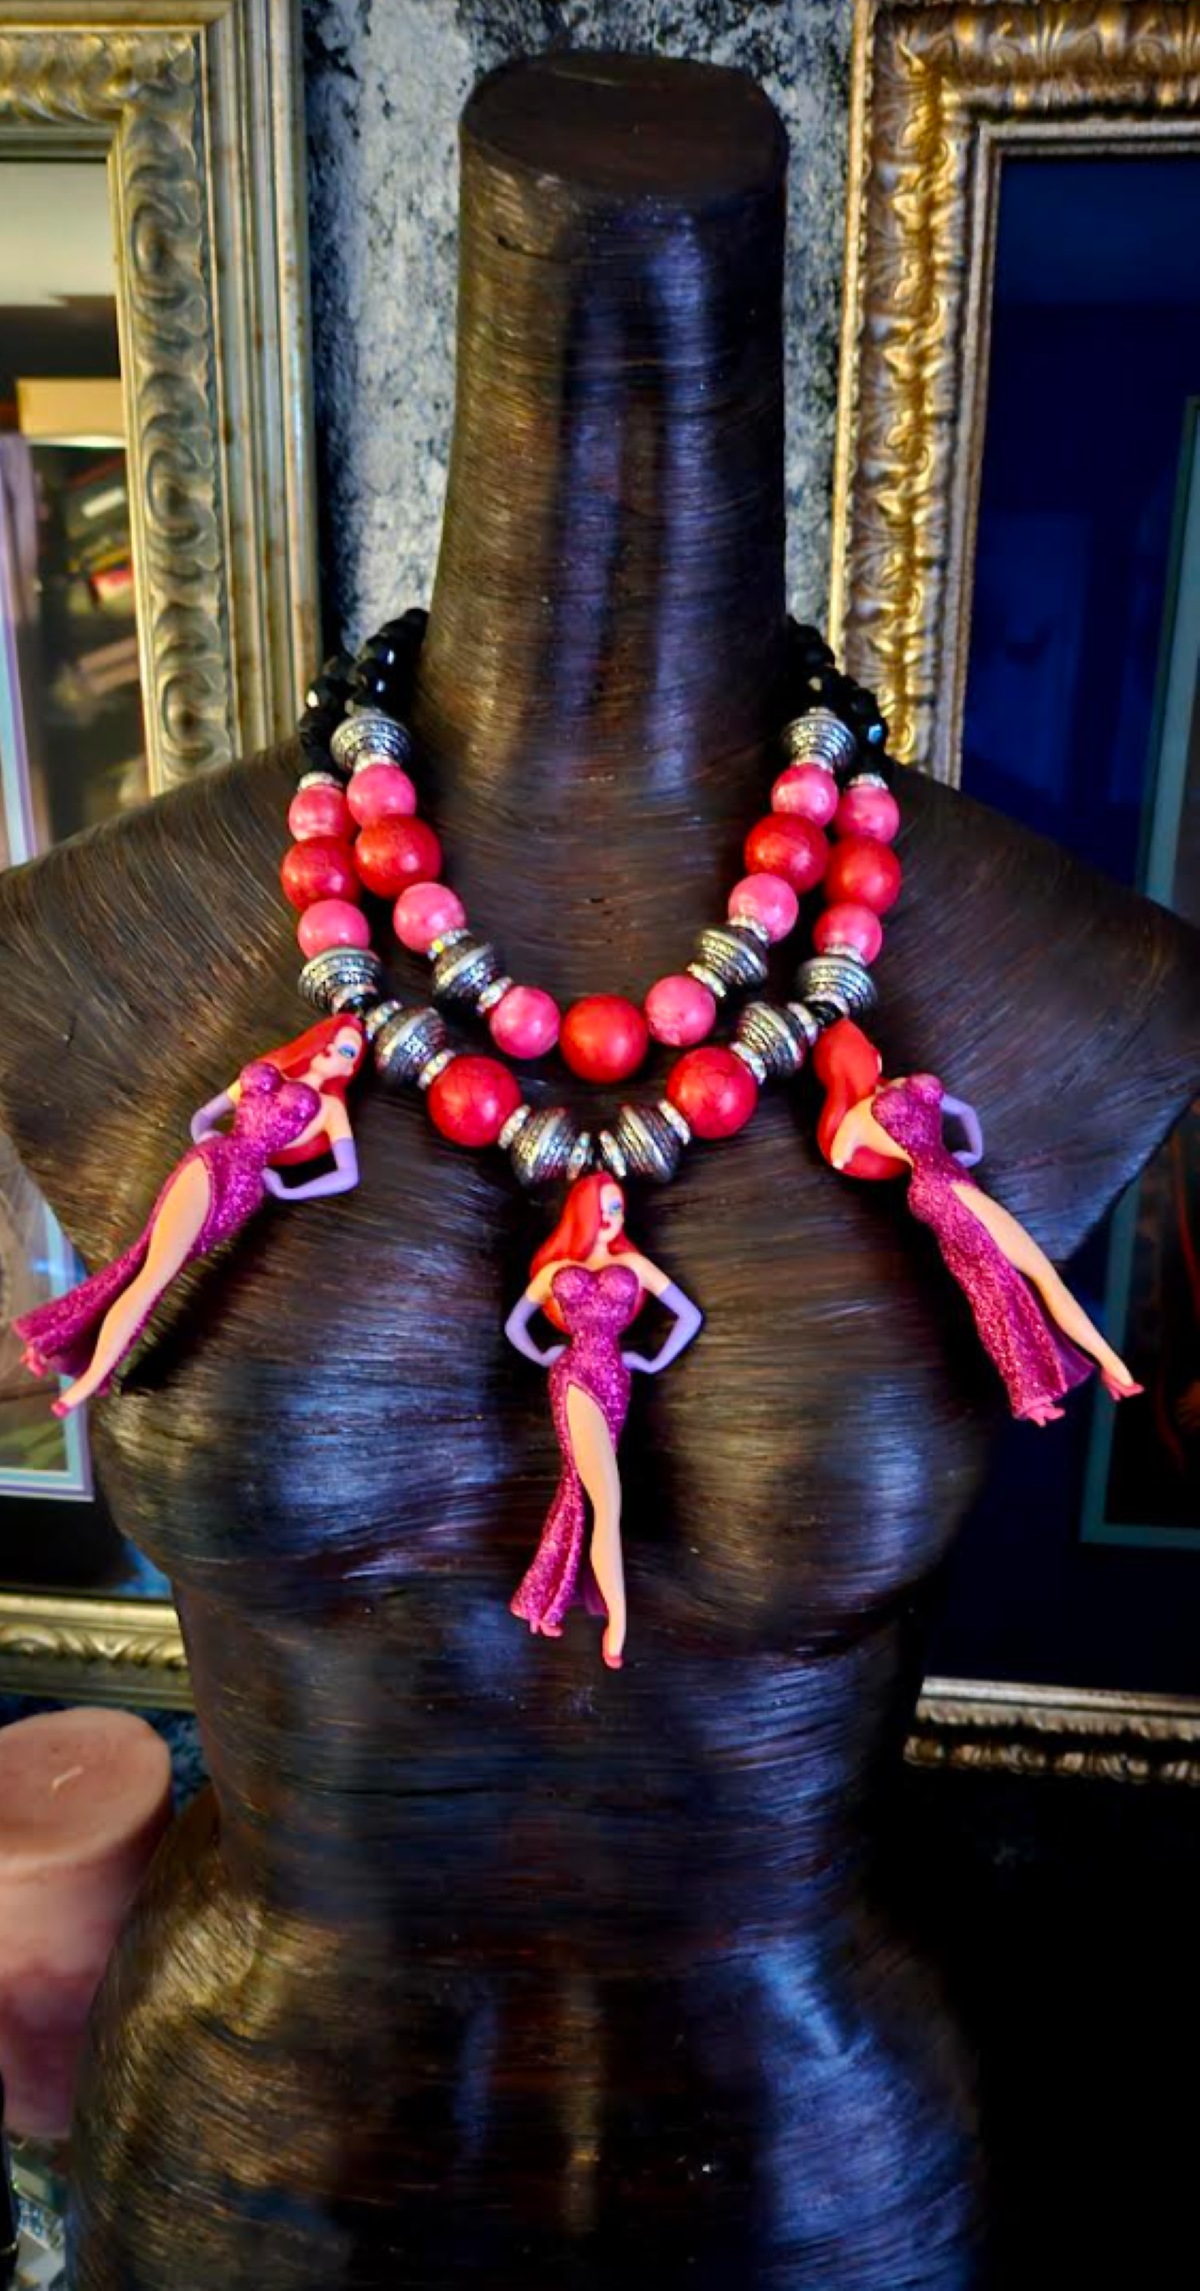 Jessica Rabbit Oversized Beaded Statement Necklace, Femme Fatale Cartoon Character Chest Piece, Whimsical Jewelry